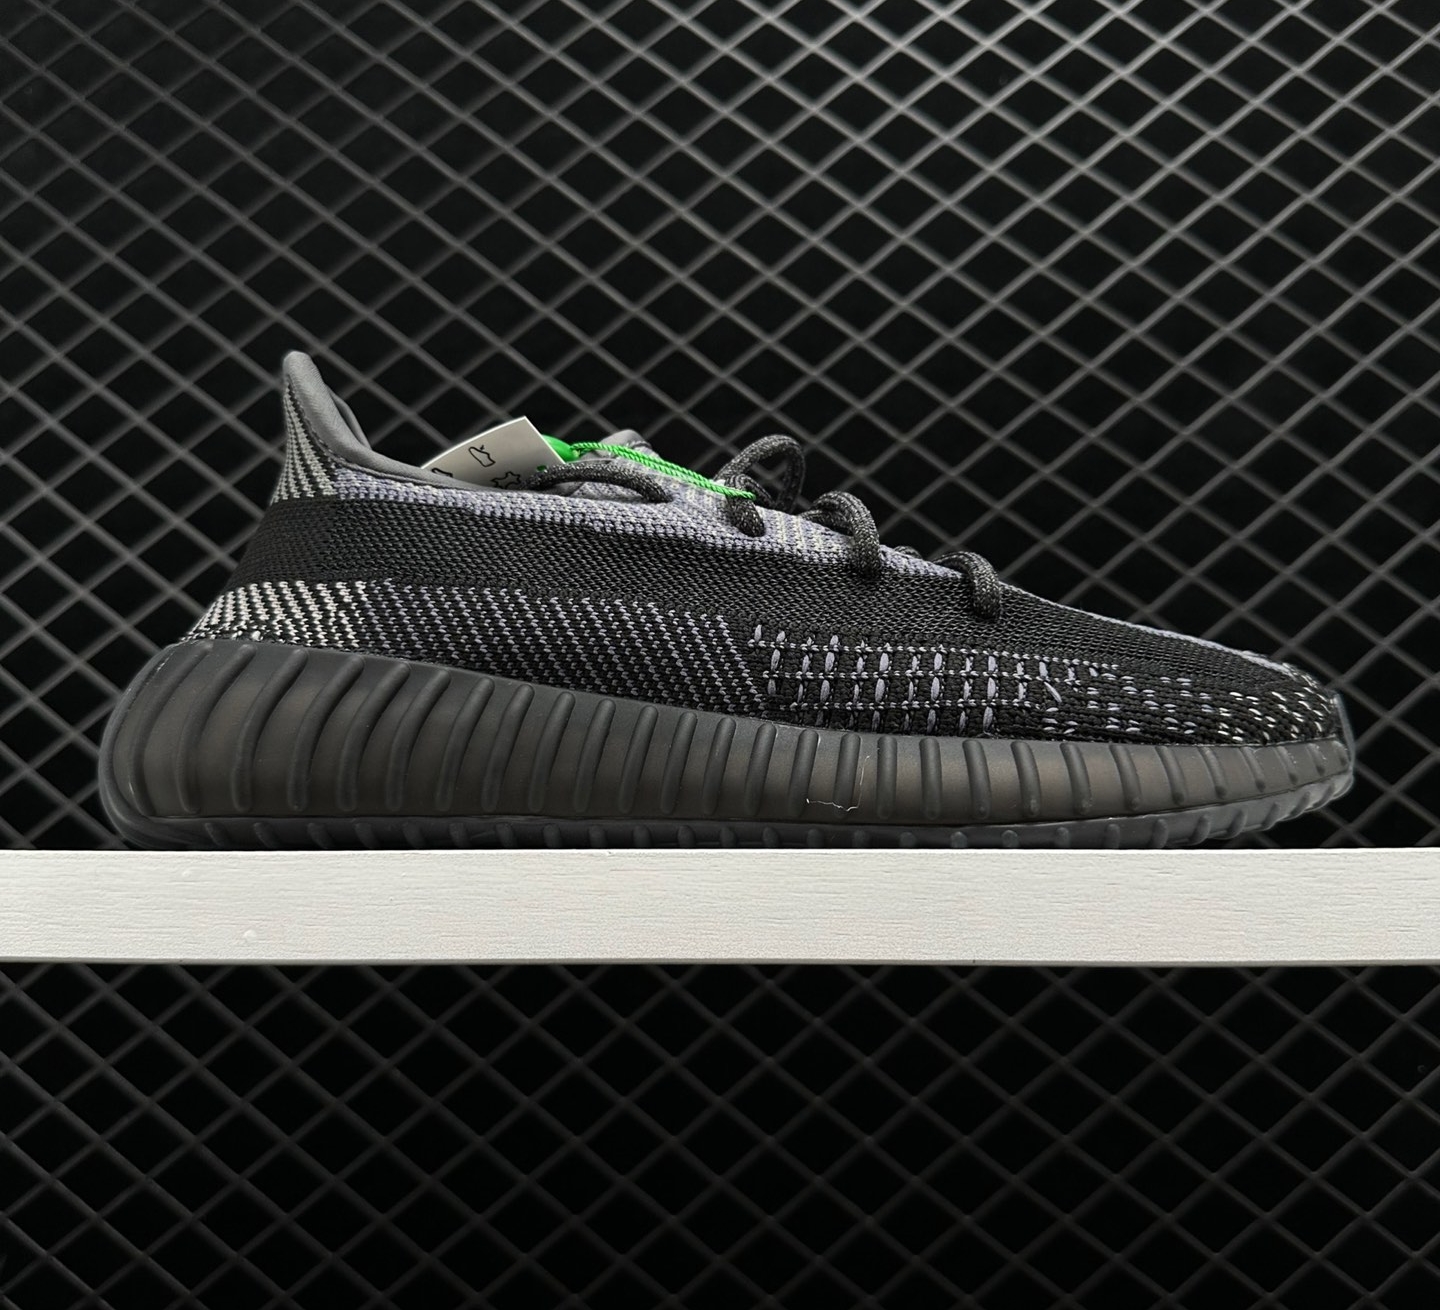 Adidas Yeezy Boost 350 V2 Black - Iconic Sneaker for Style & Comfort